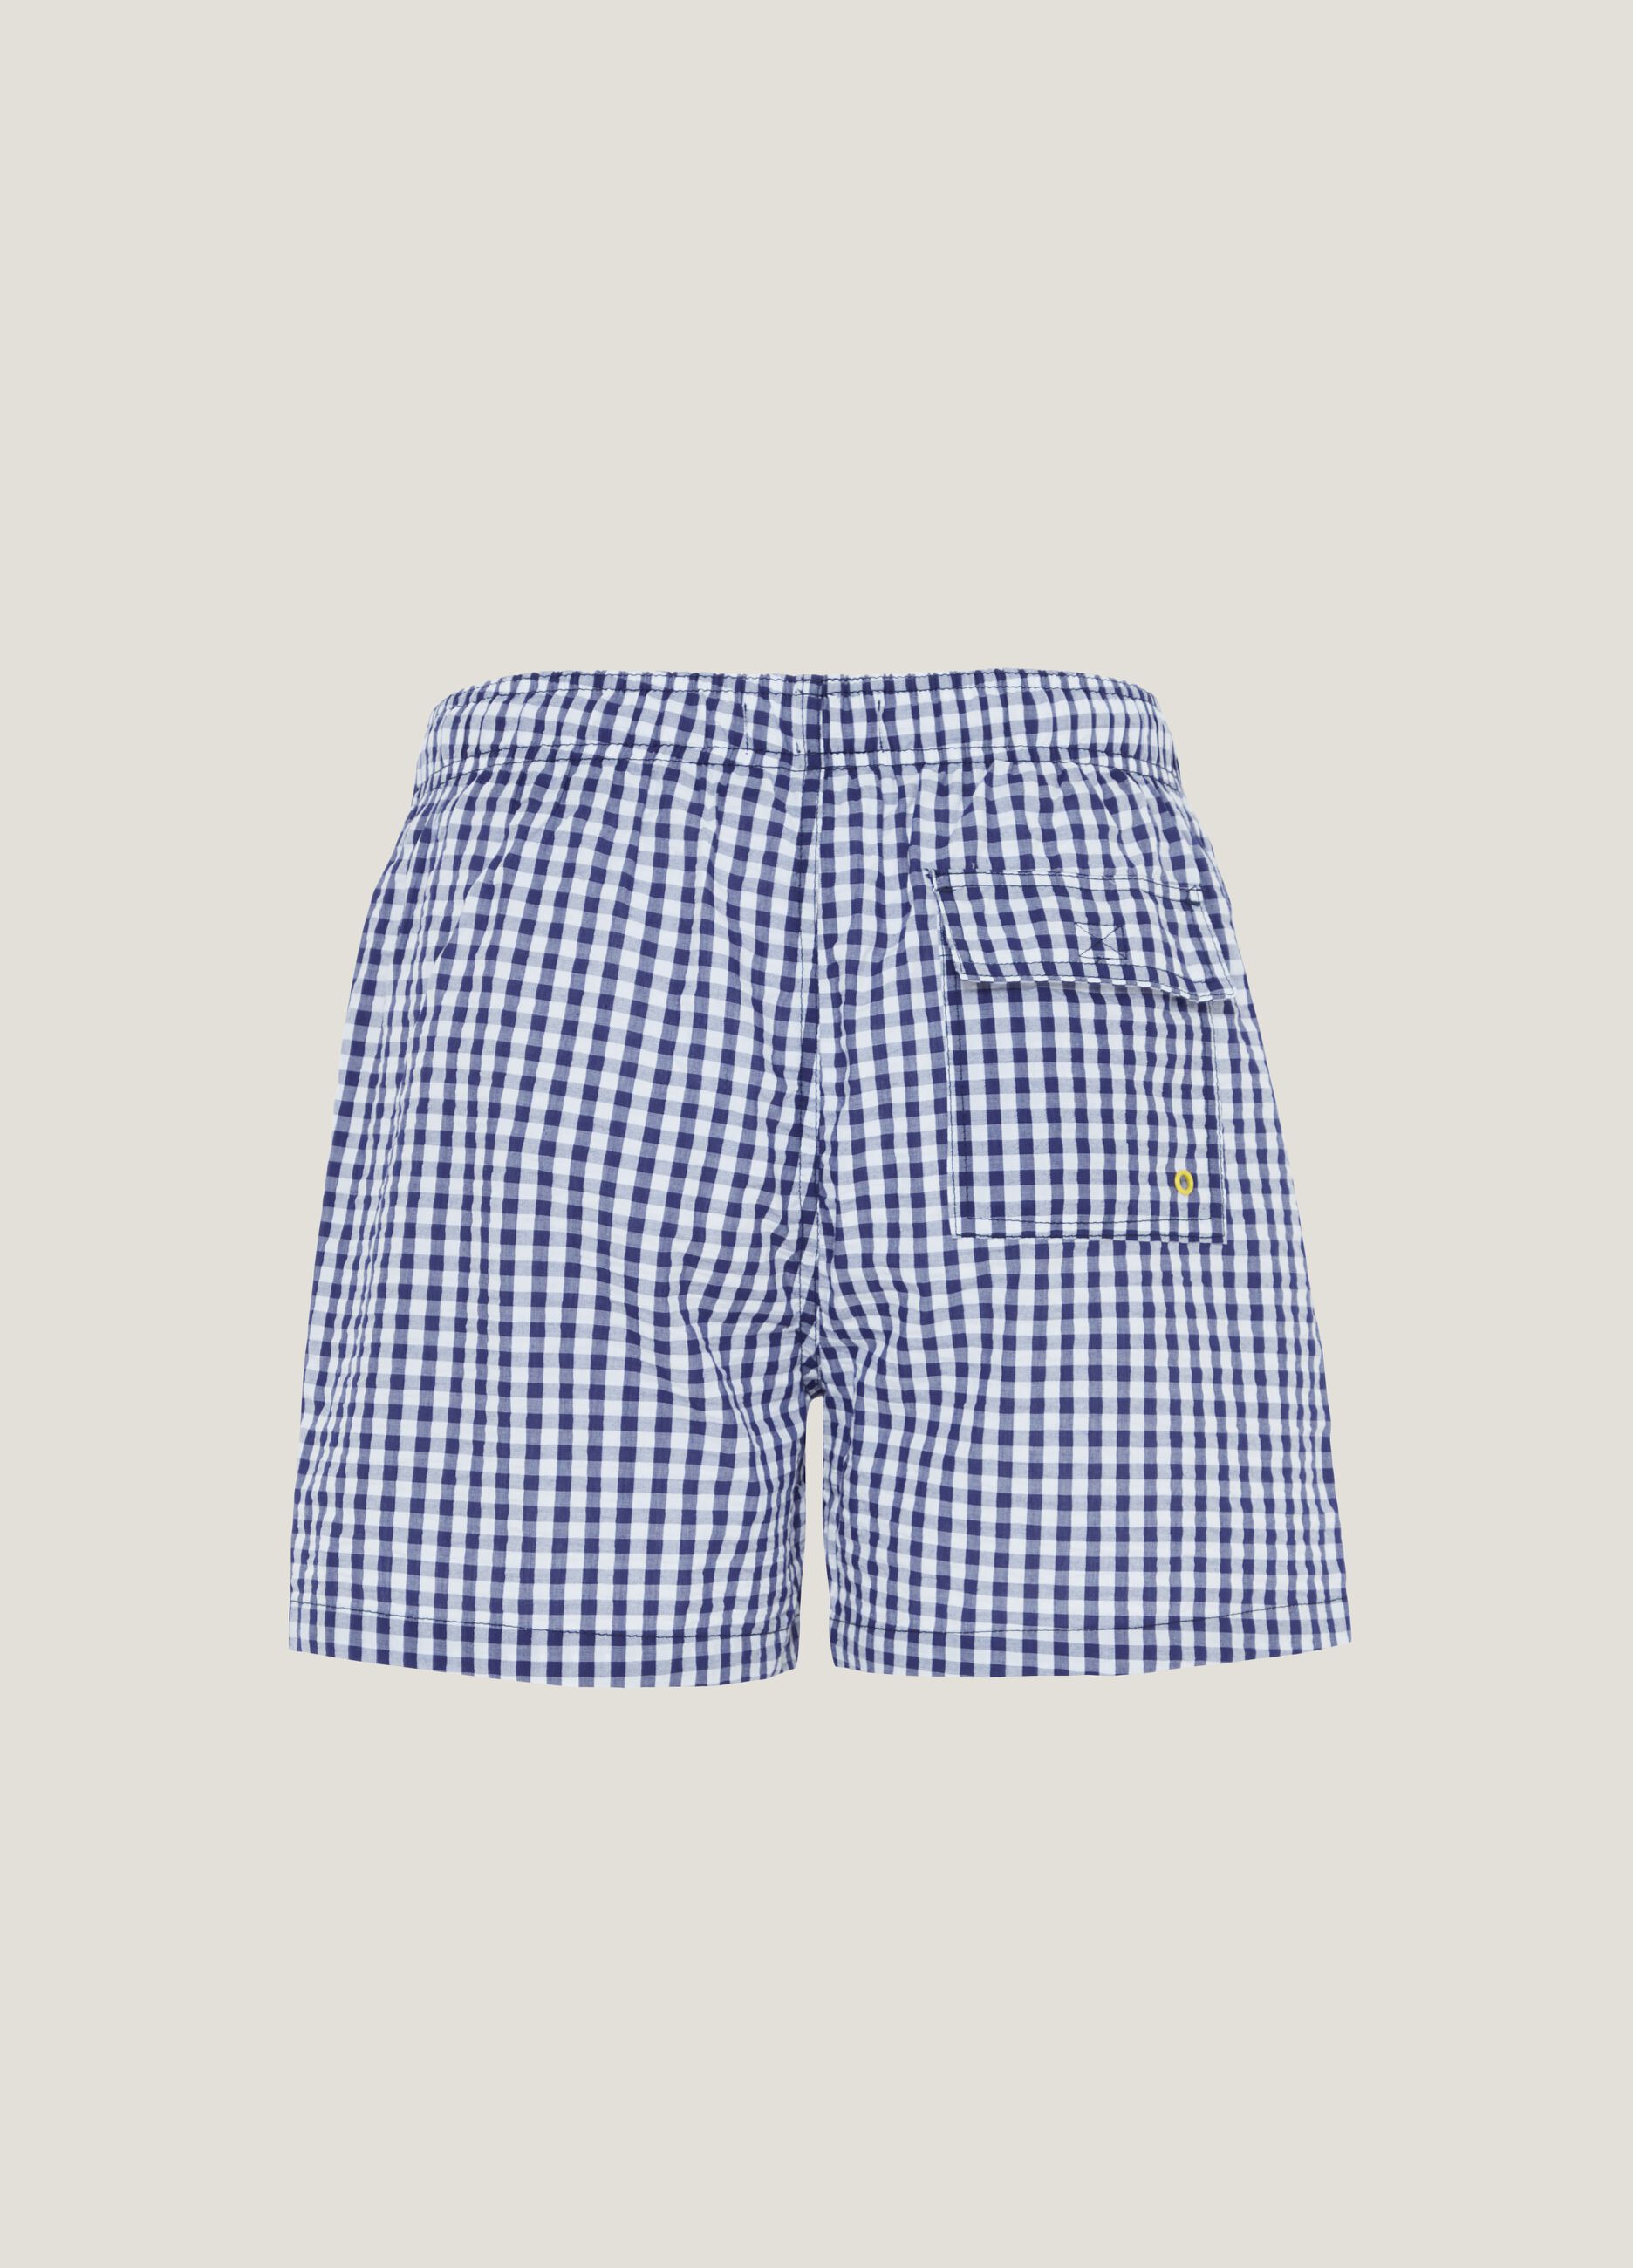 Swimming trunks in gingham cotton